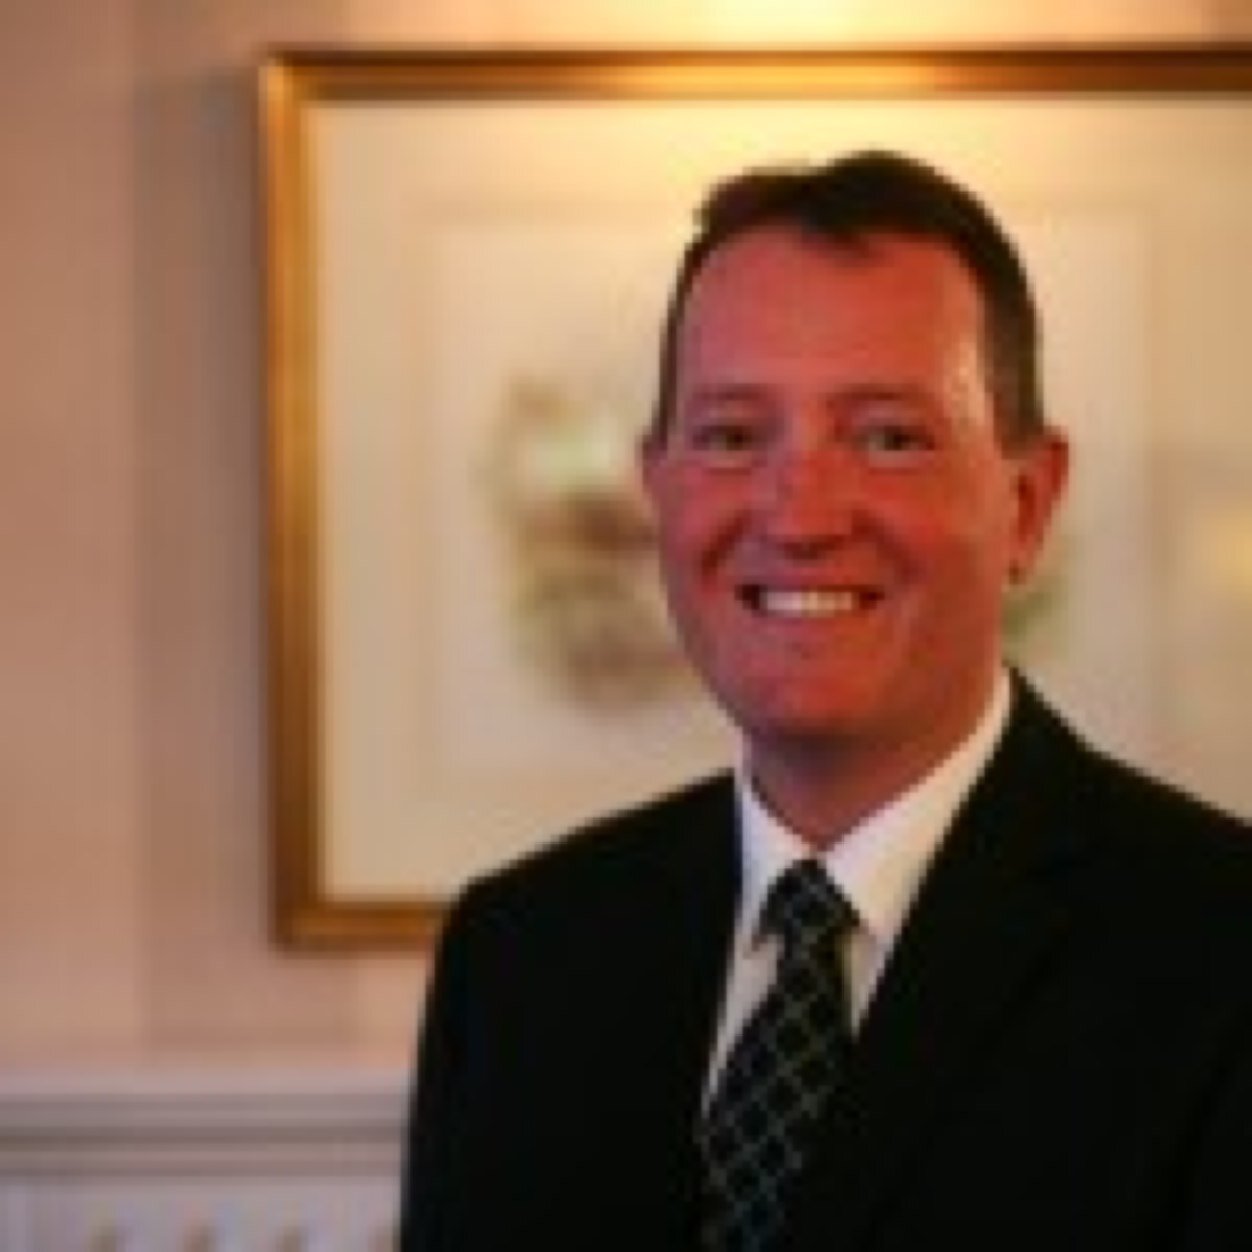 Paul Matthews, chief executive of Monmouthshire County Council